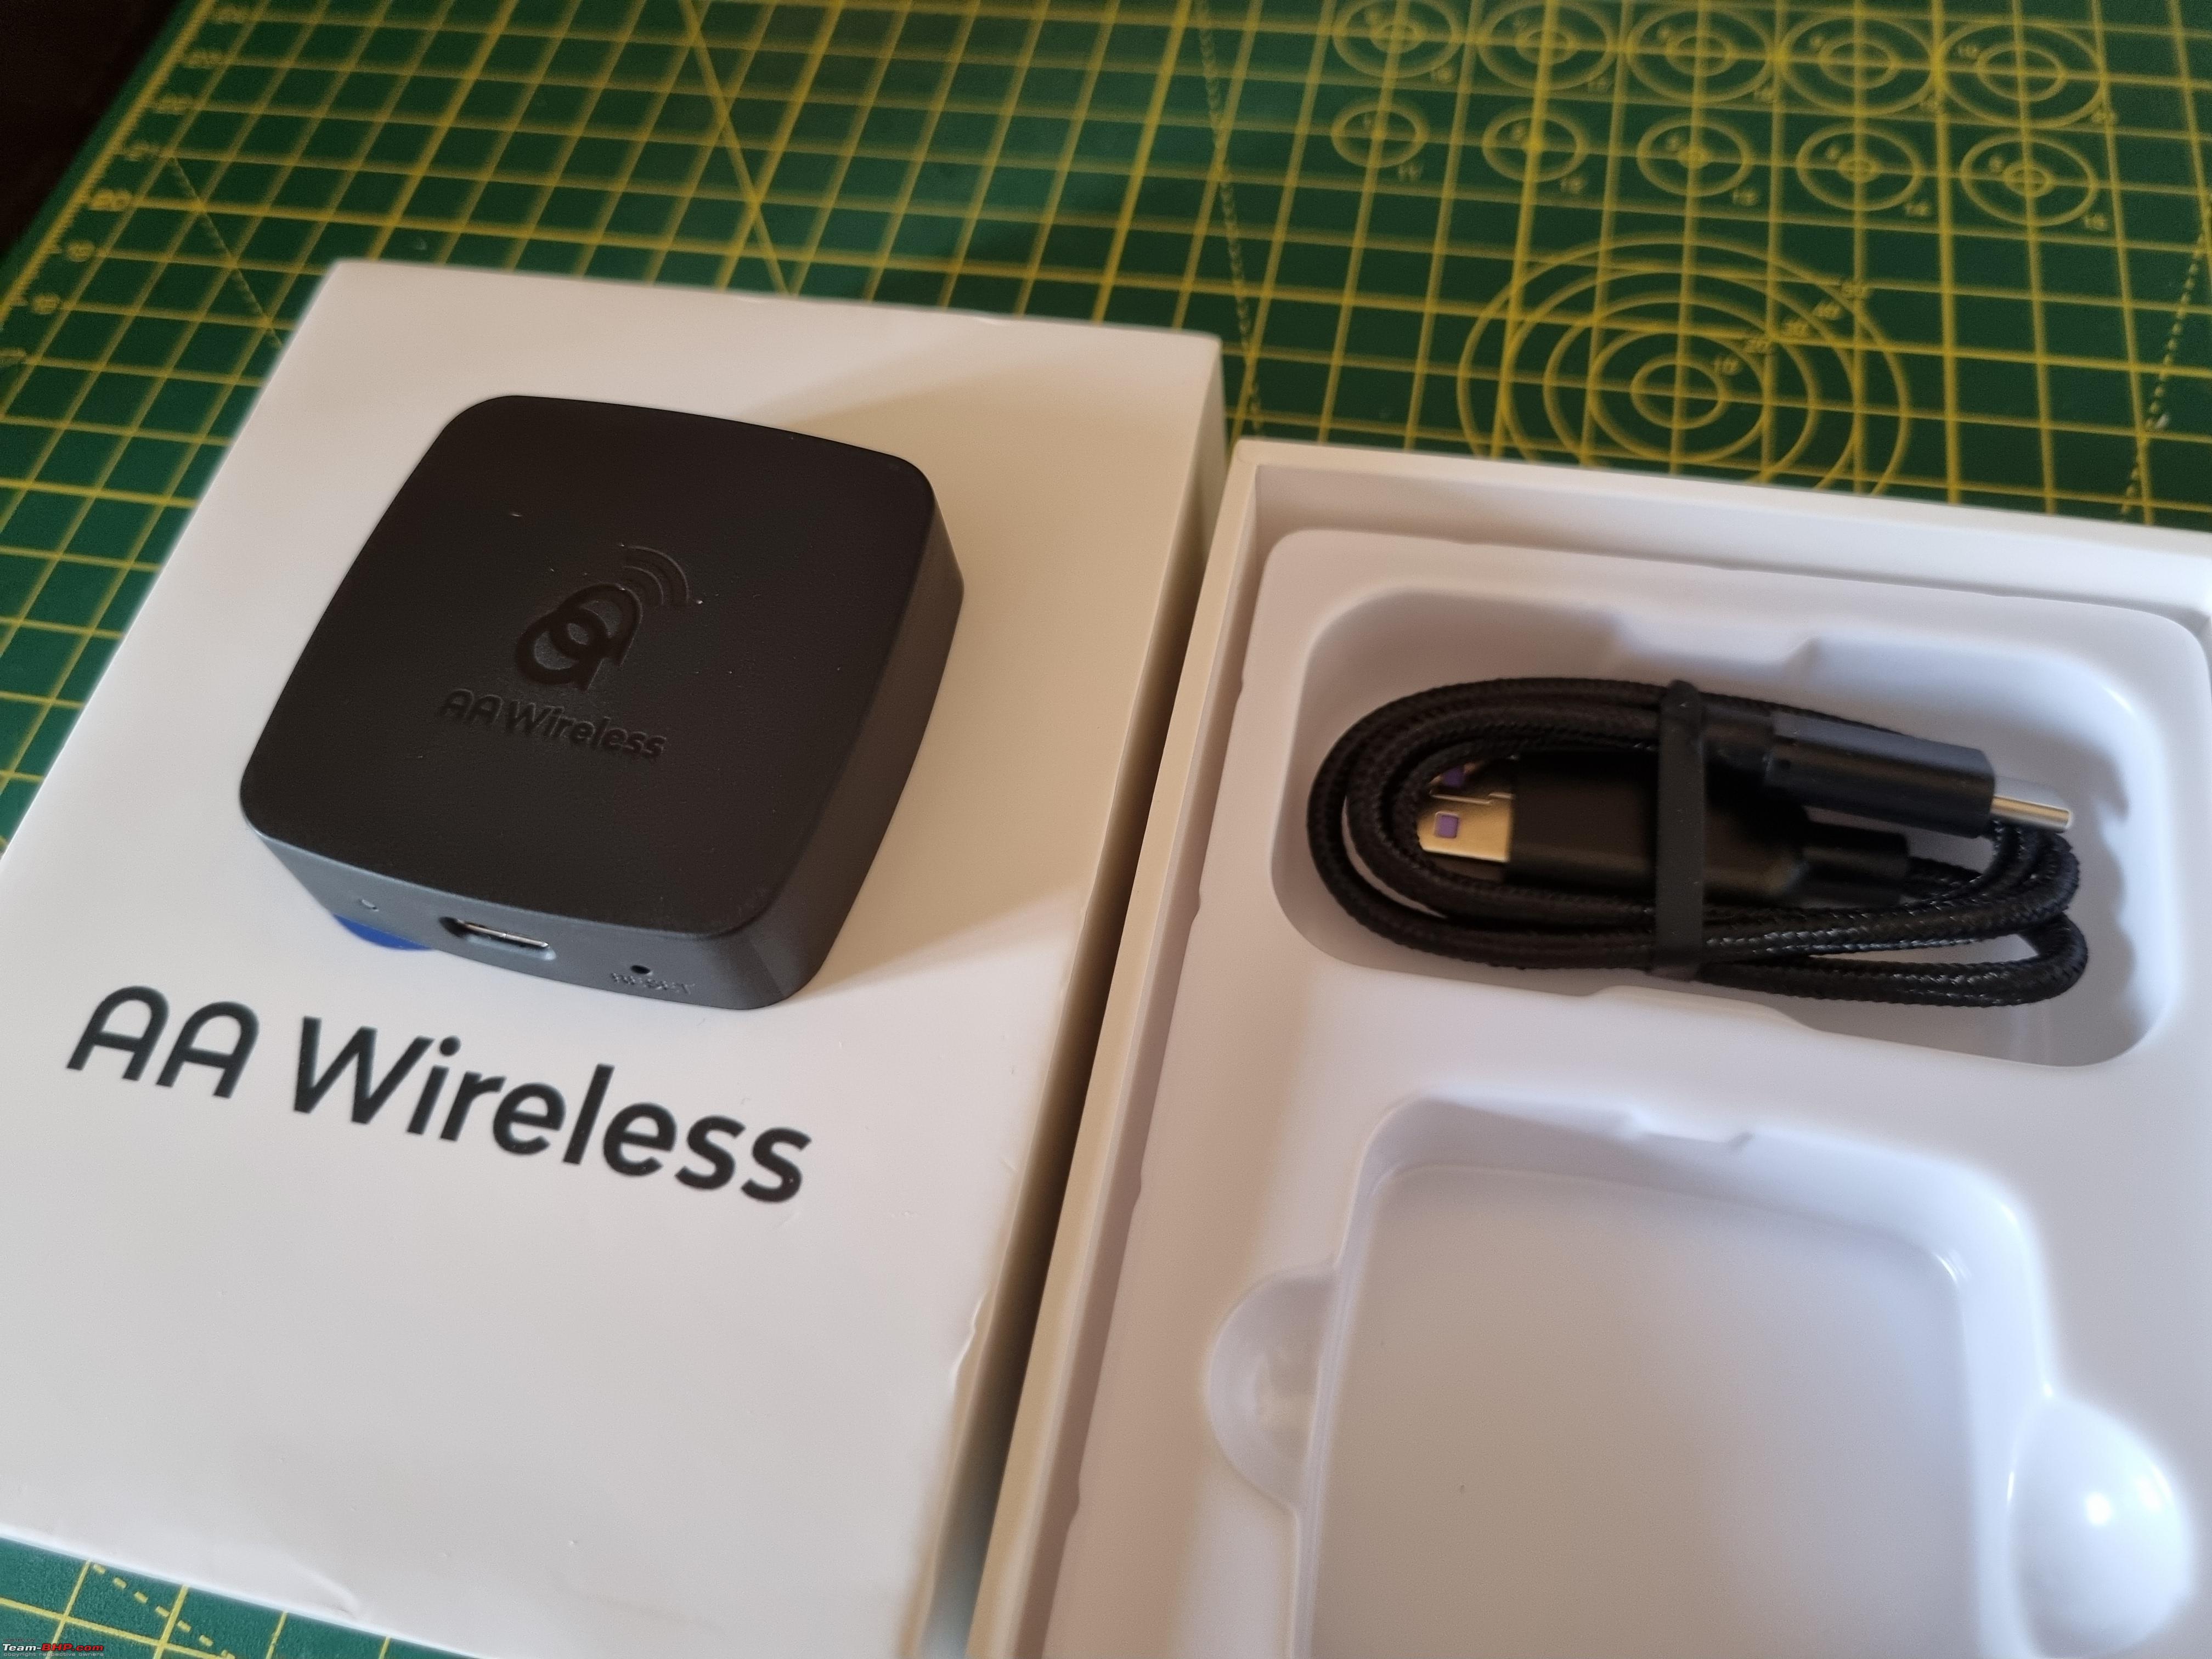 AAWireless - Indiegogo project for wireless Android Auto dongle - Team-BHP